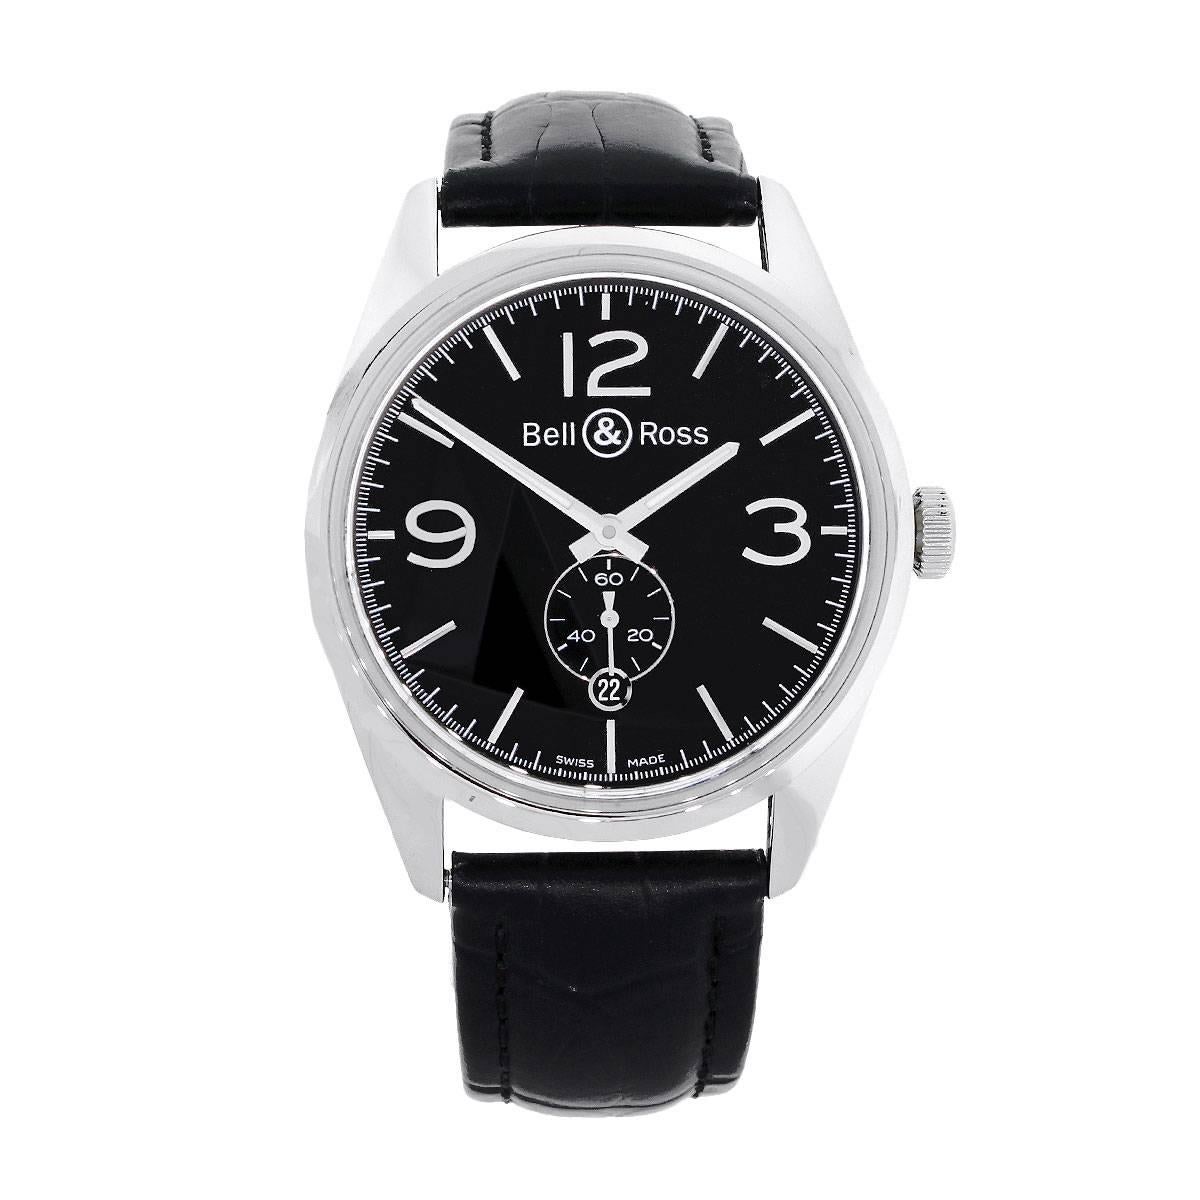 Brand: Bell & Ross
Style: BR123 Vintage Original Black
MPN: BR123 -95-SP
Case Material: Stainless Steel
Case Diameter: 41mm
Bezel: Stainless Steel
Dial: Black dial with arabic numerals and silver hands. Date can be found at 6 O’clock
Bracelet: Black